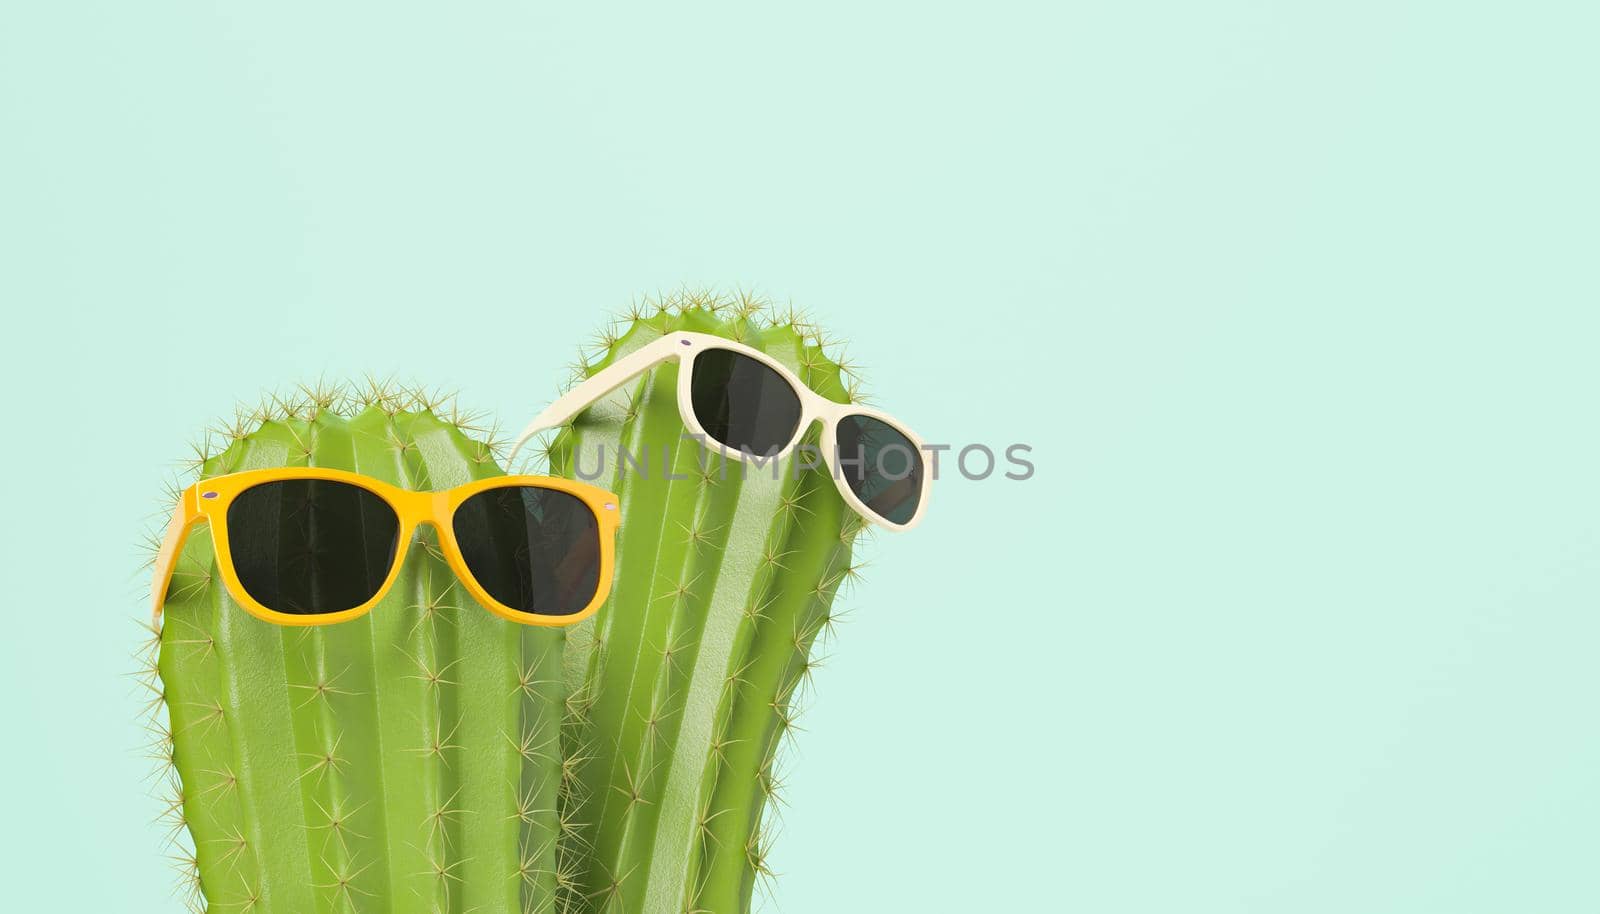 close-up of cactus with sunglasses on blue background by asolano